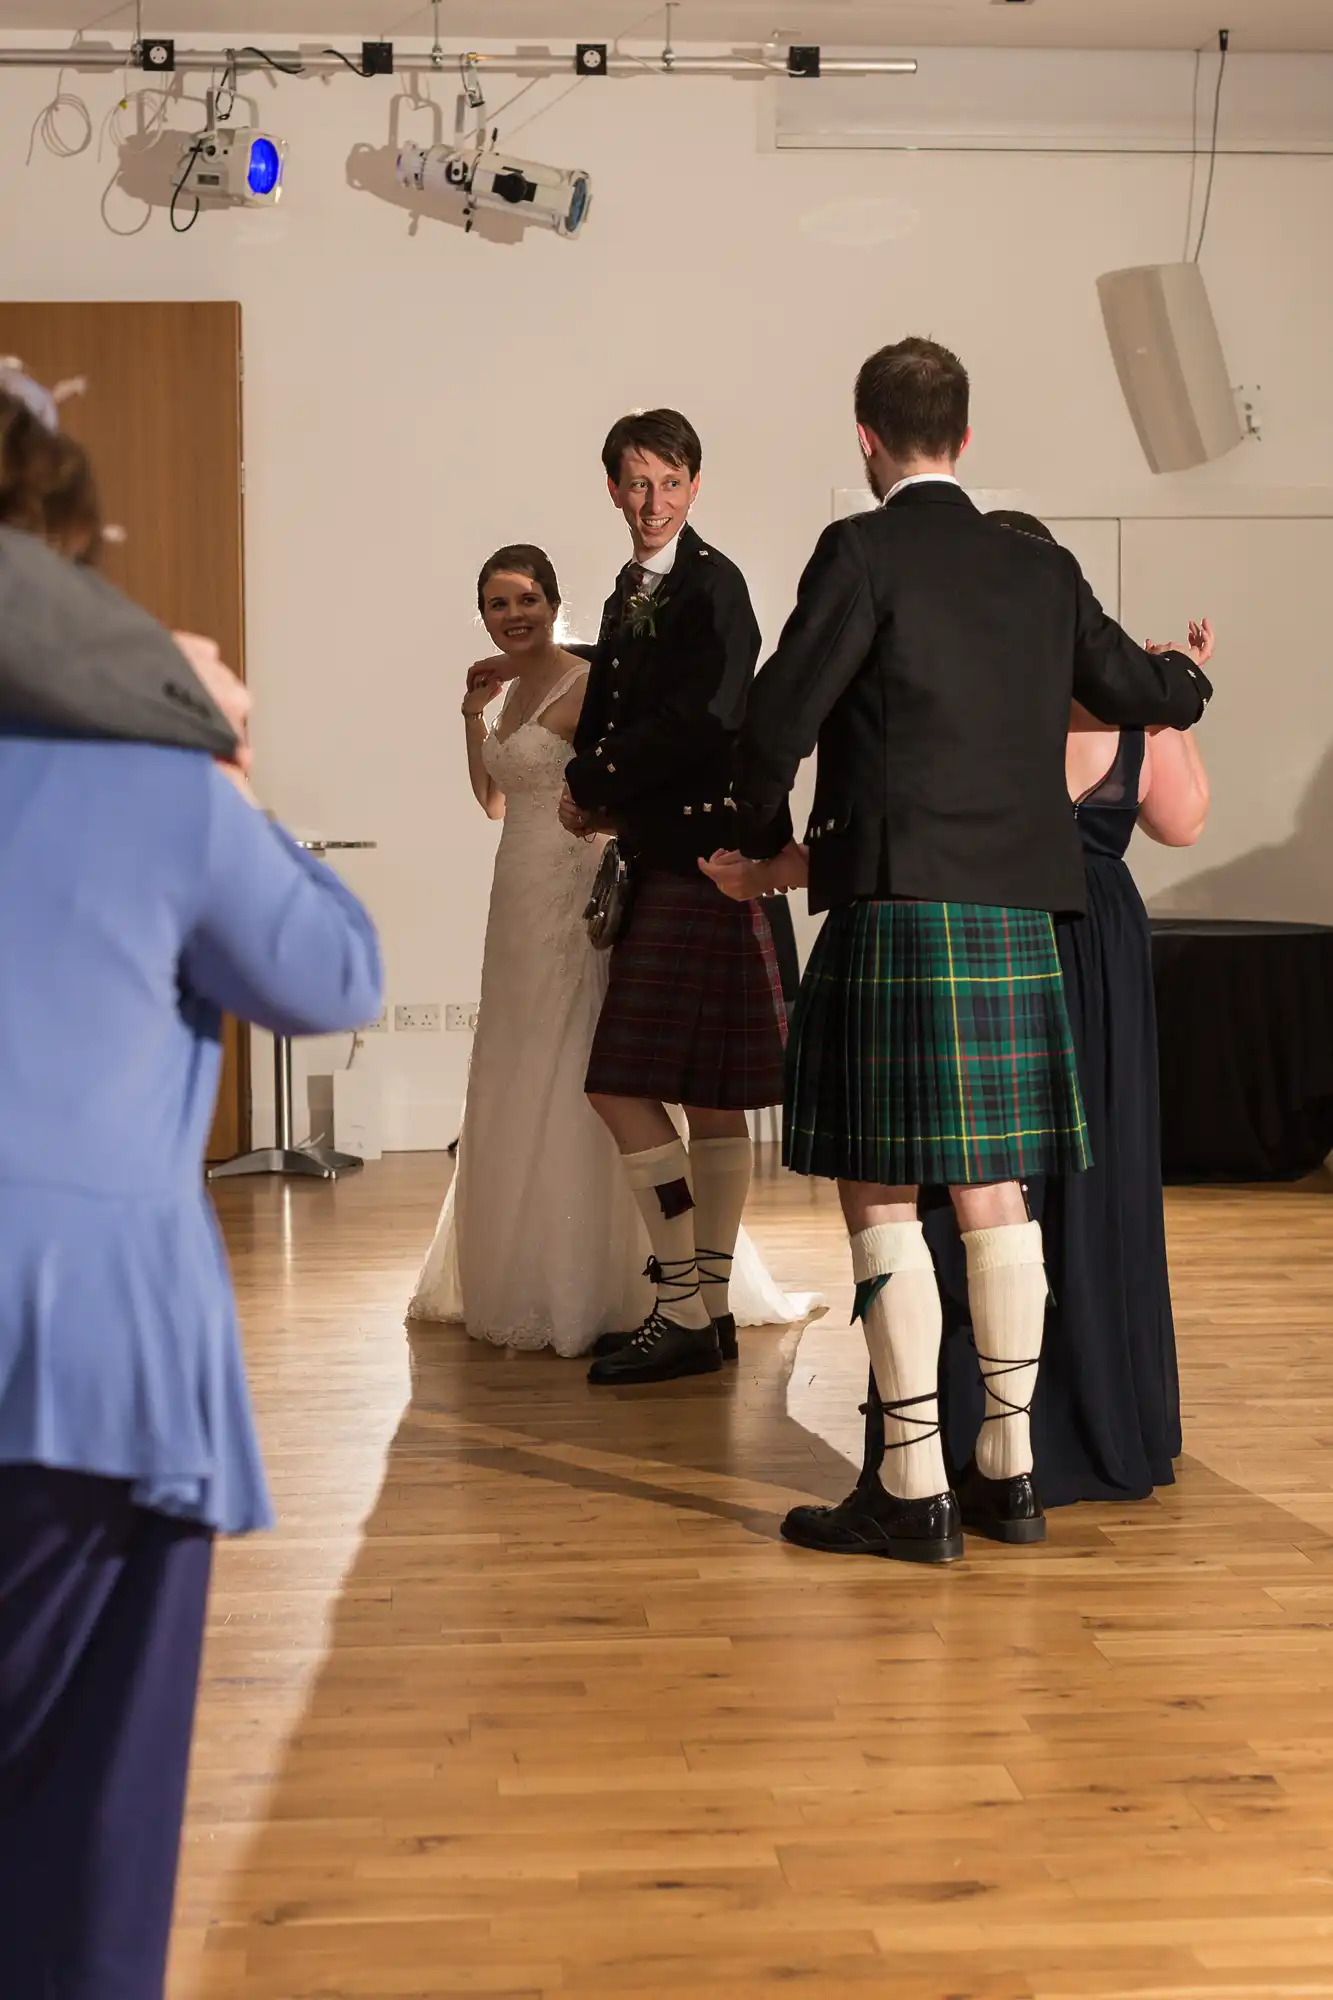 A bride and groom smile as they participate in a dance, surrounded by guests in a well-lit hall, with traditional scottish kilts visible.